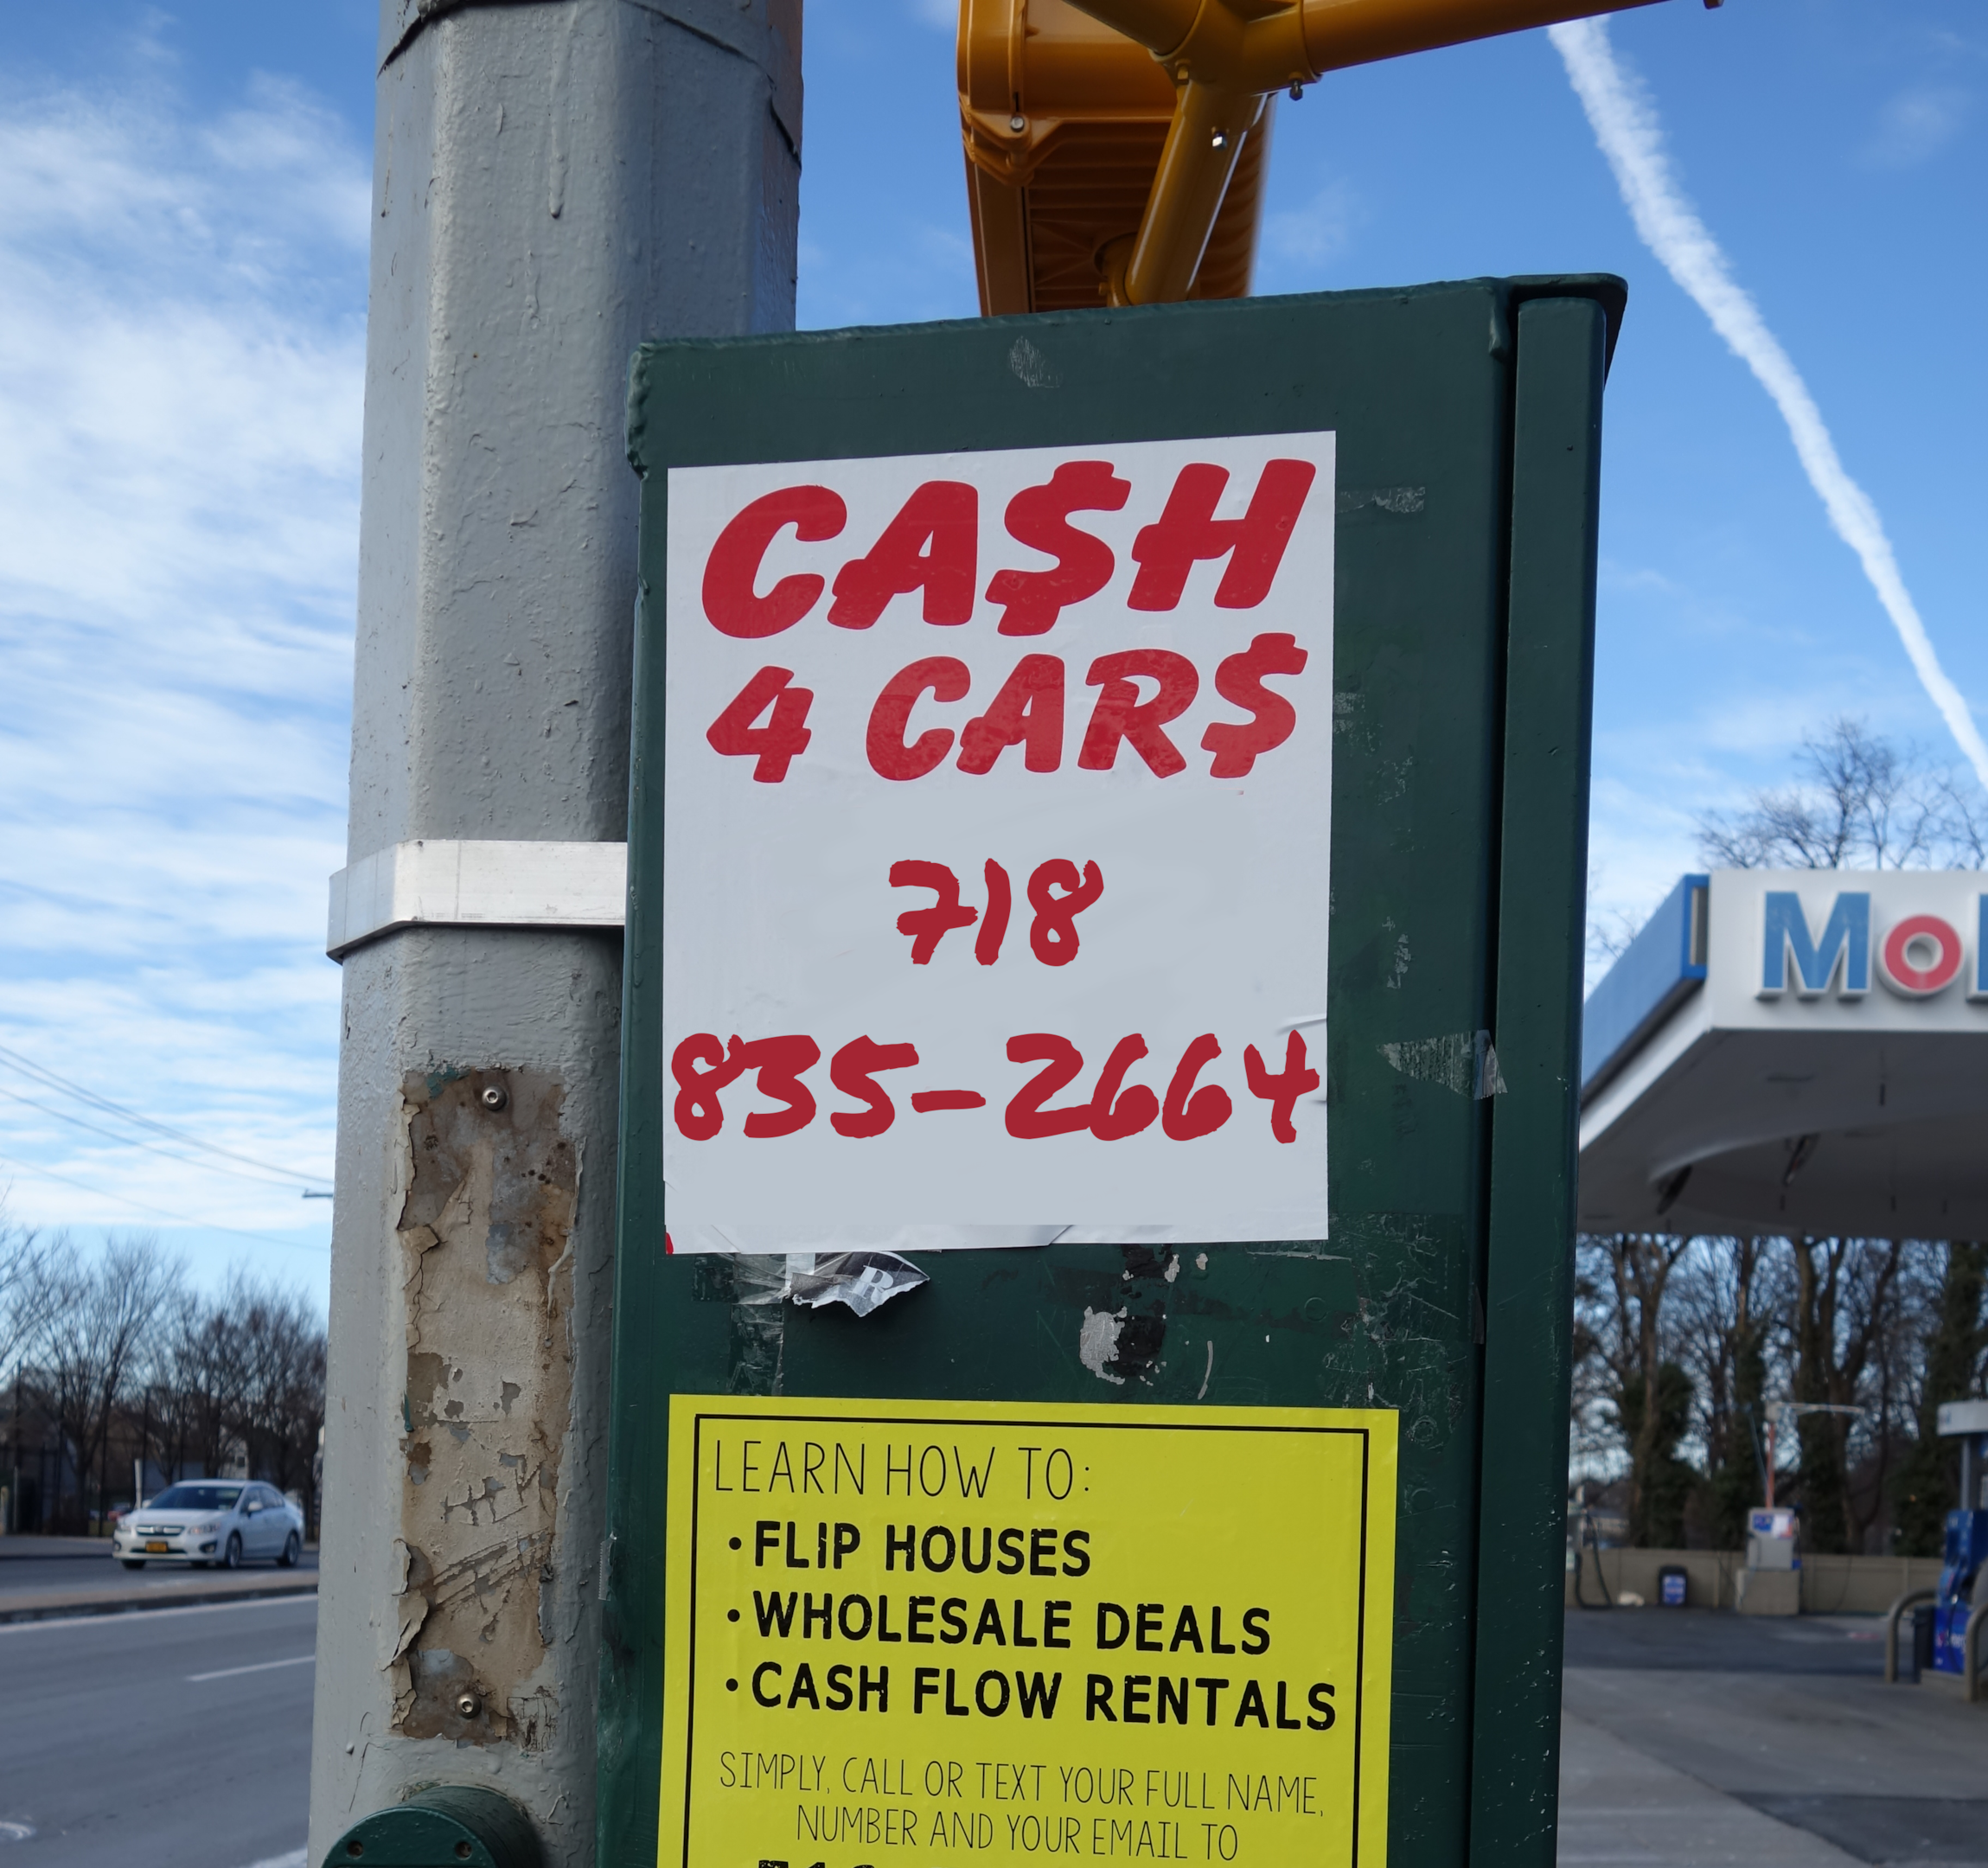 A man holding a sign with "Cash for Cars" written on it